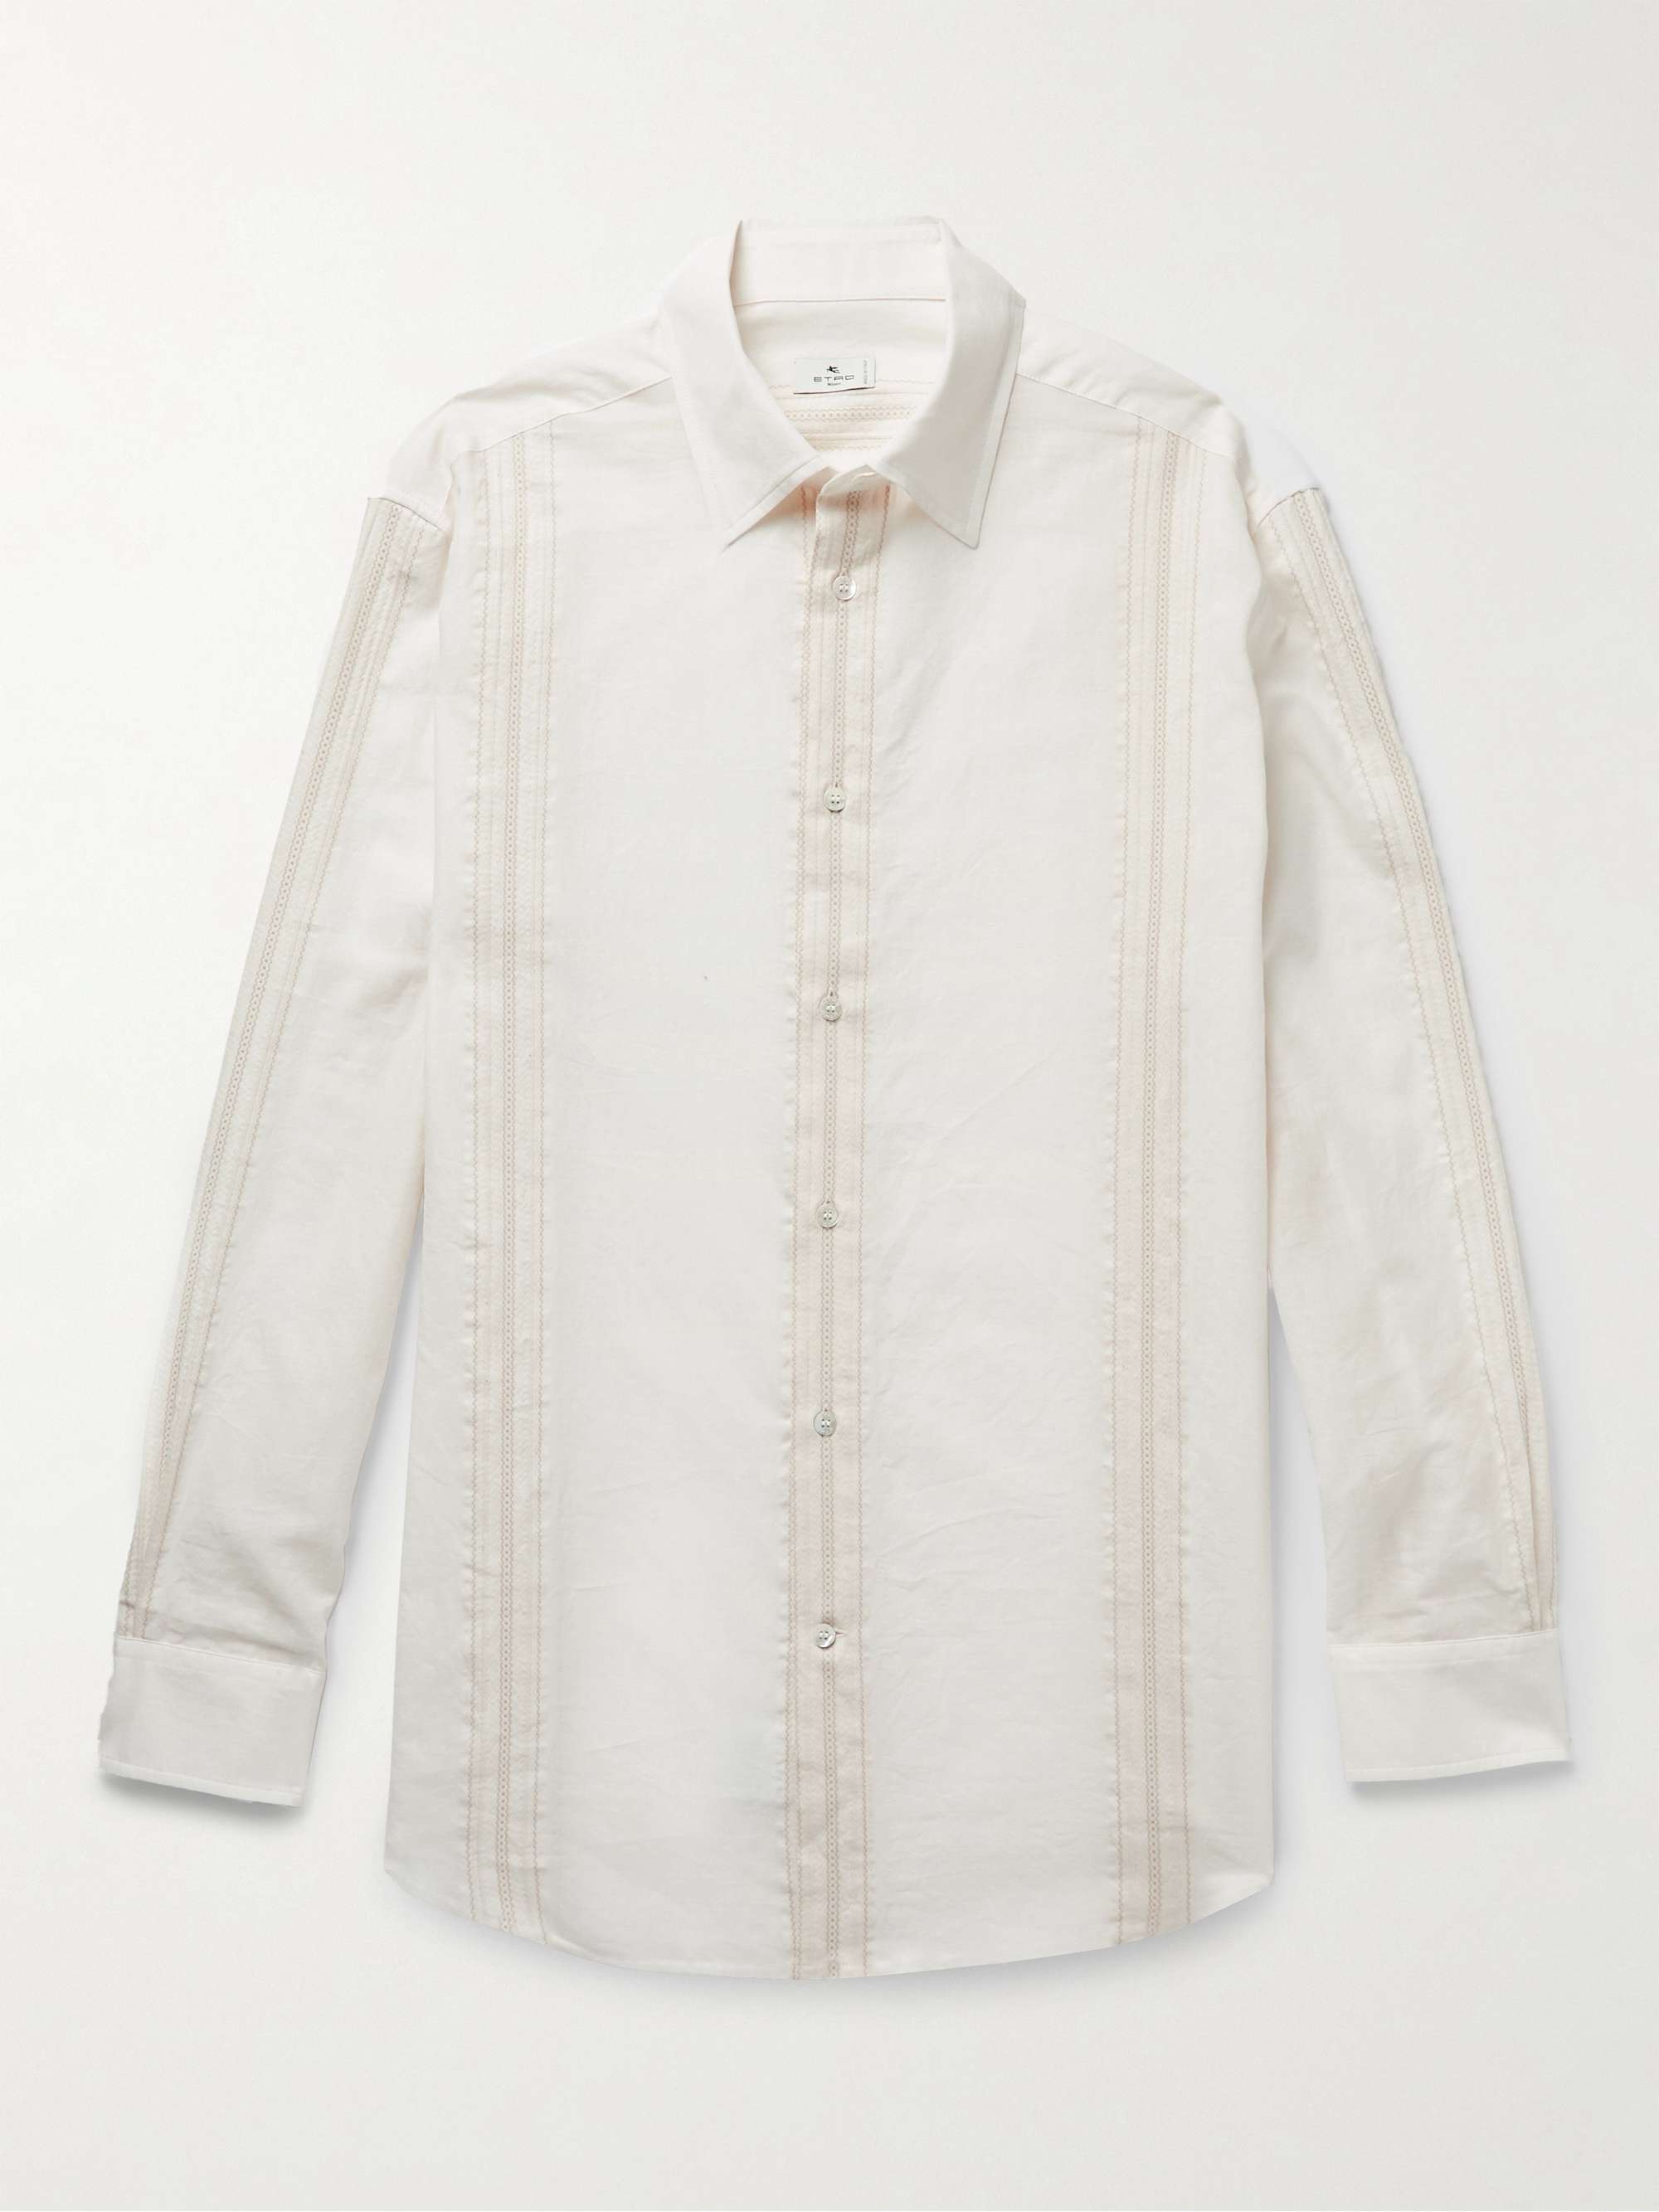 ETRO Embroidered Striped Cotton Shirt